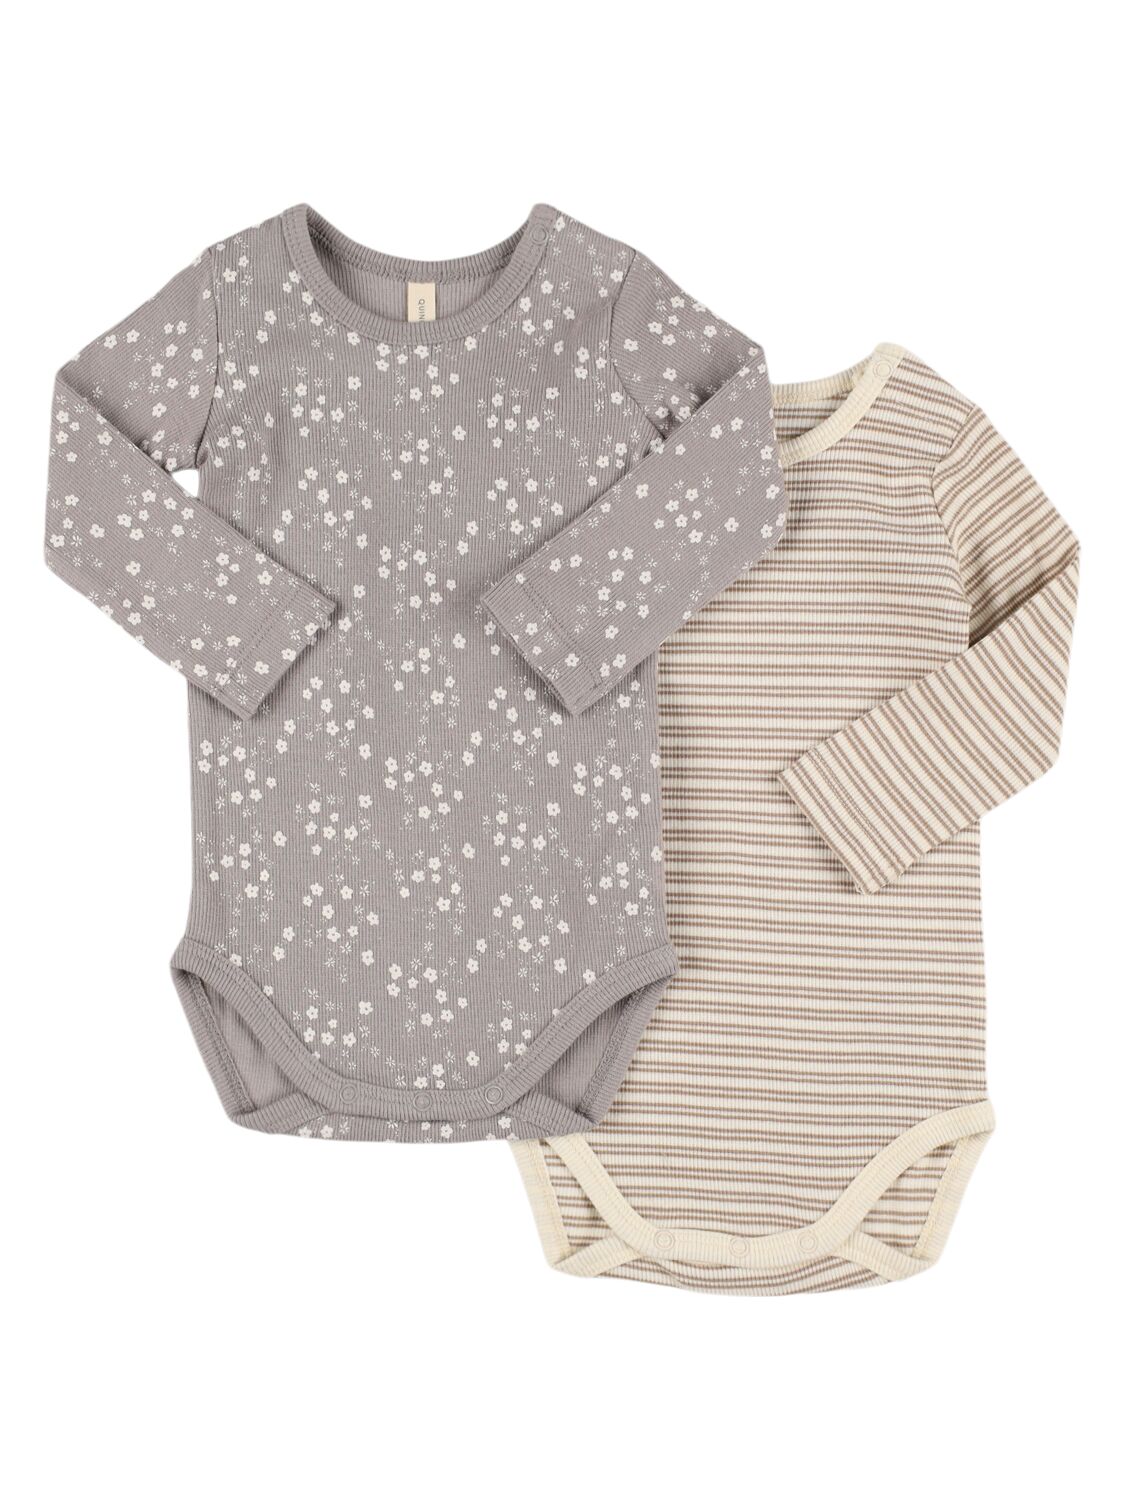 Quincy Mae Babies' Set Of 2  Organic Cotton Bodysuits In Multi